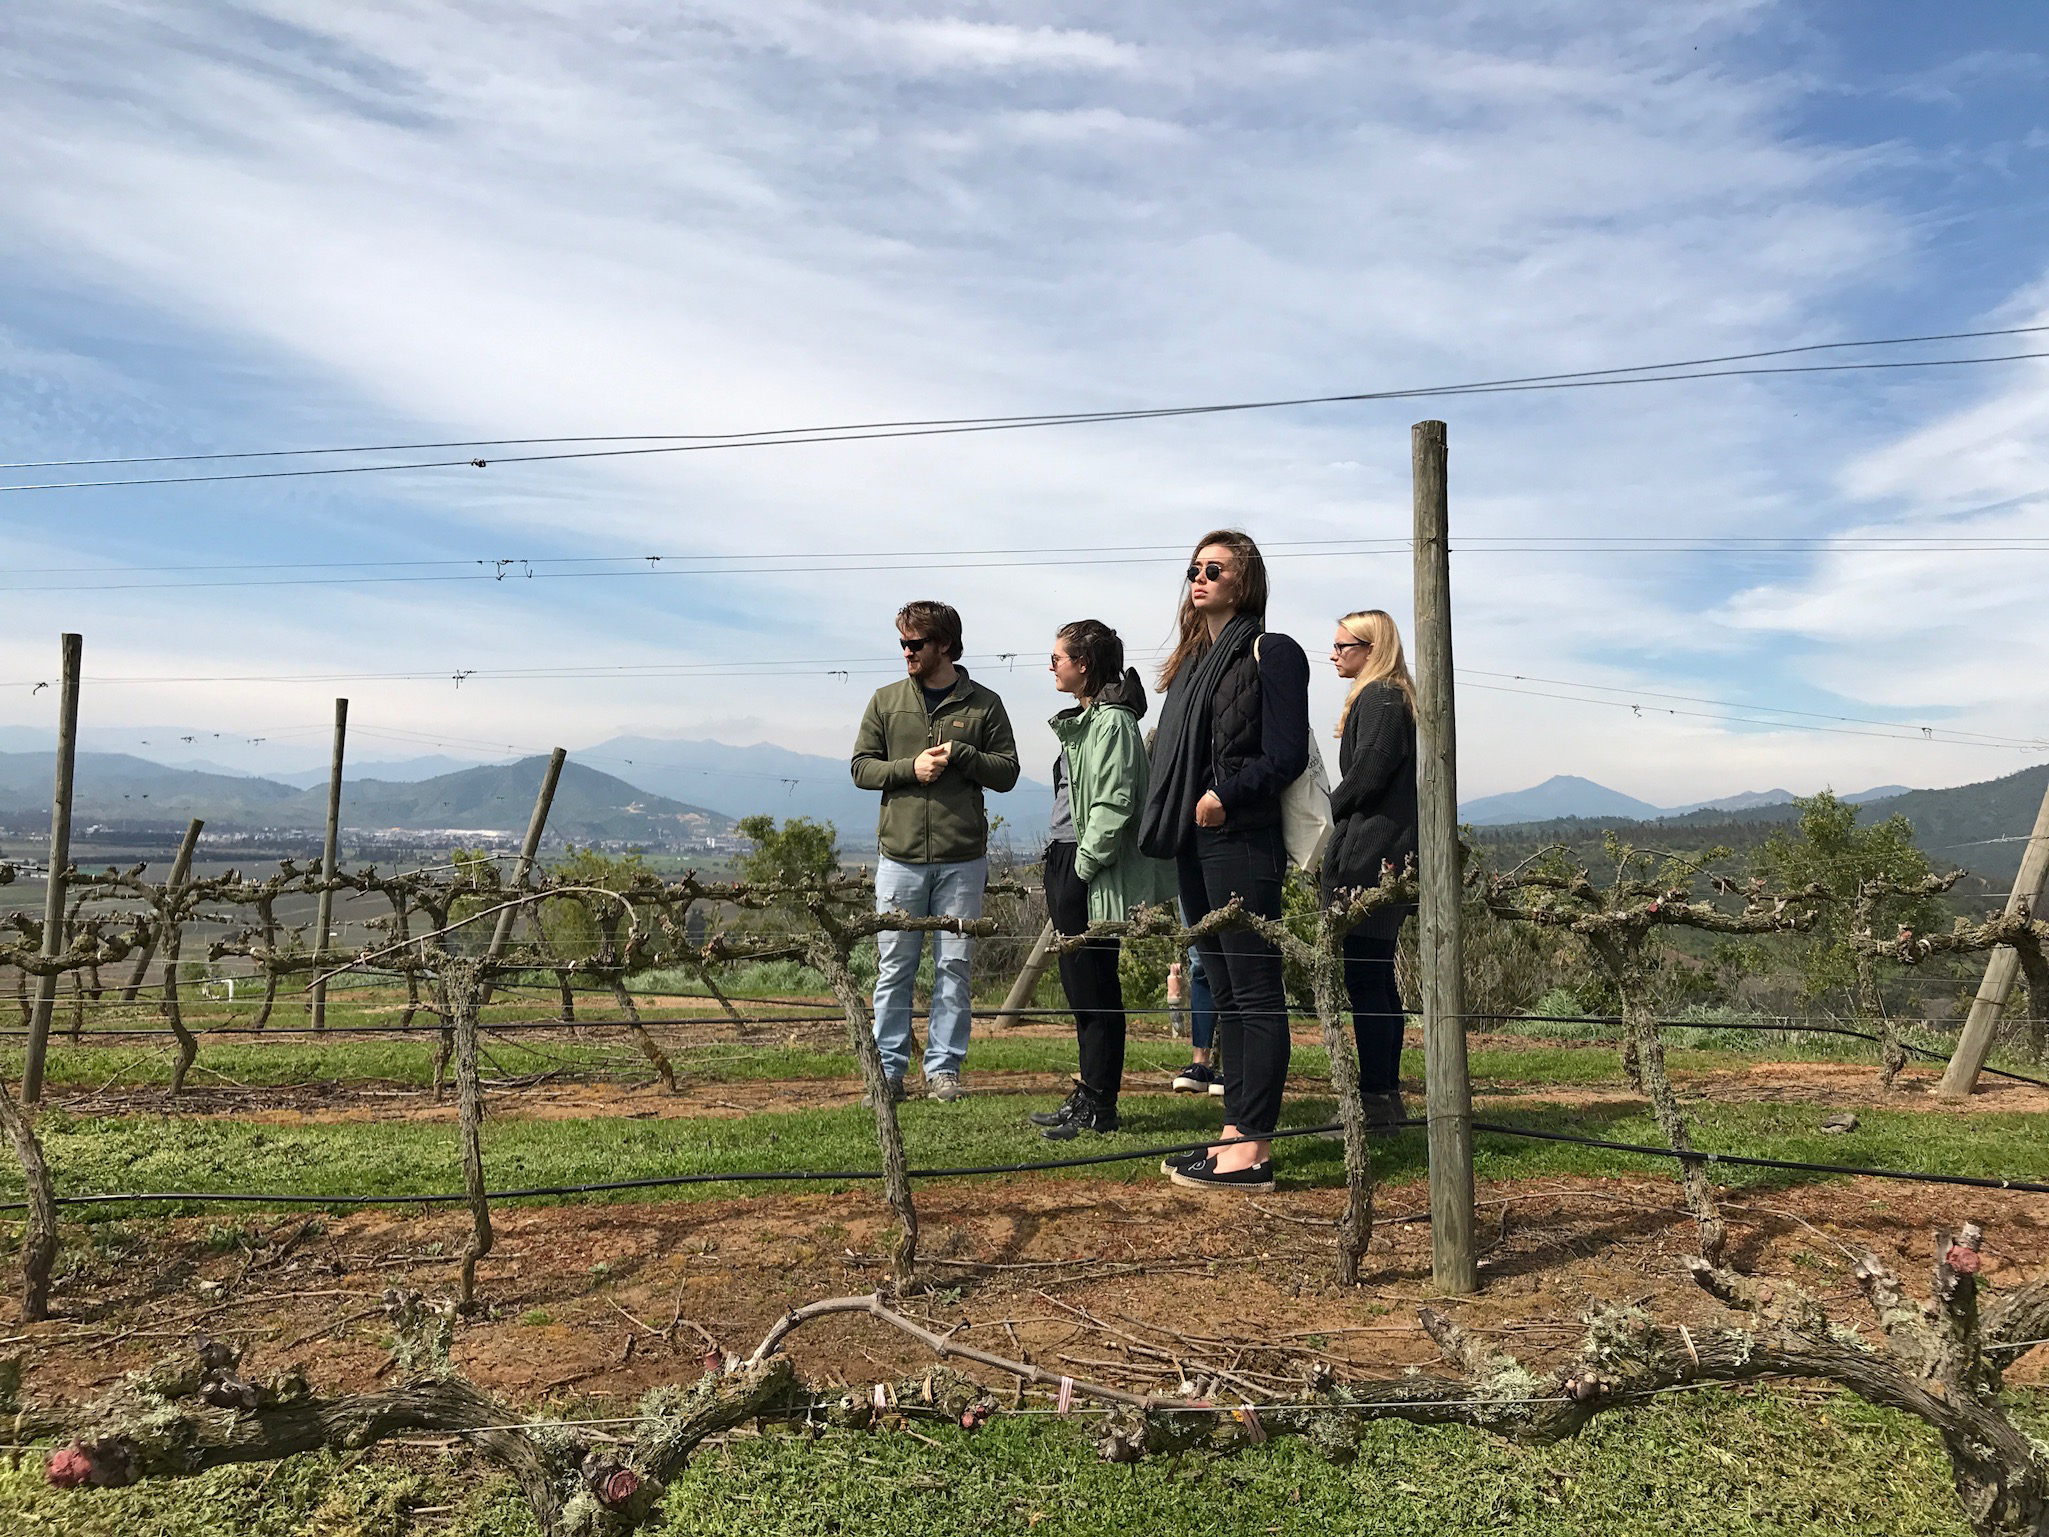 Winemaker Amael Orrego giving us tour of the vines on our first day in Chile, in early September.